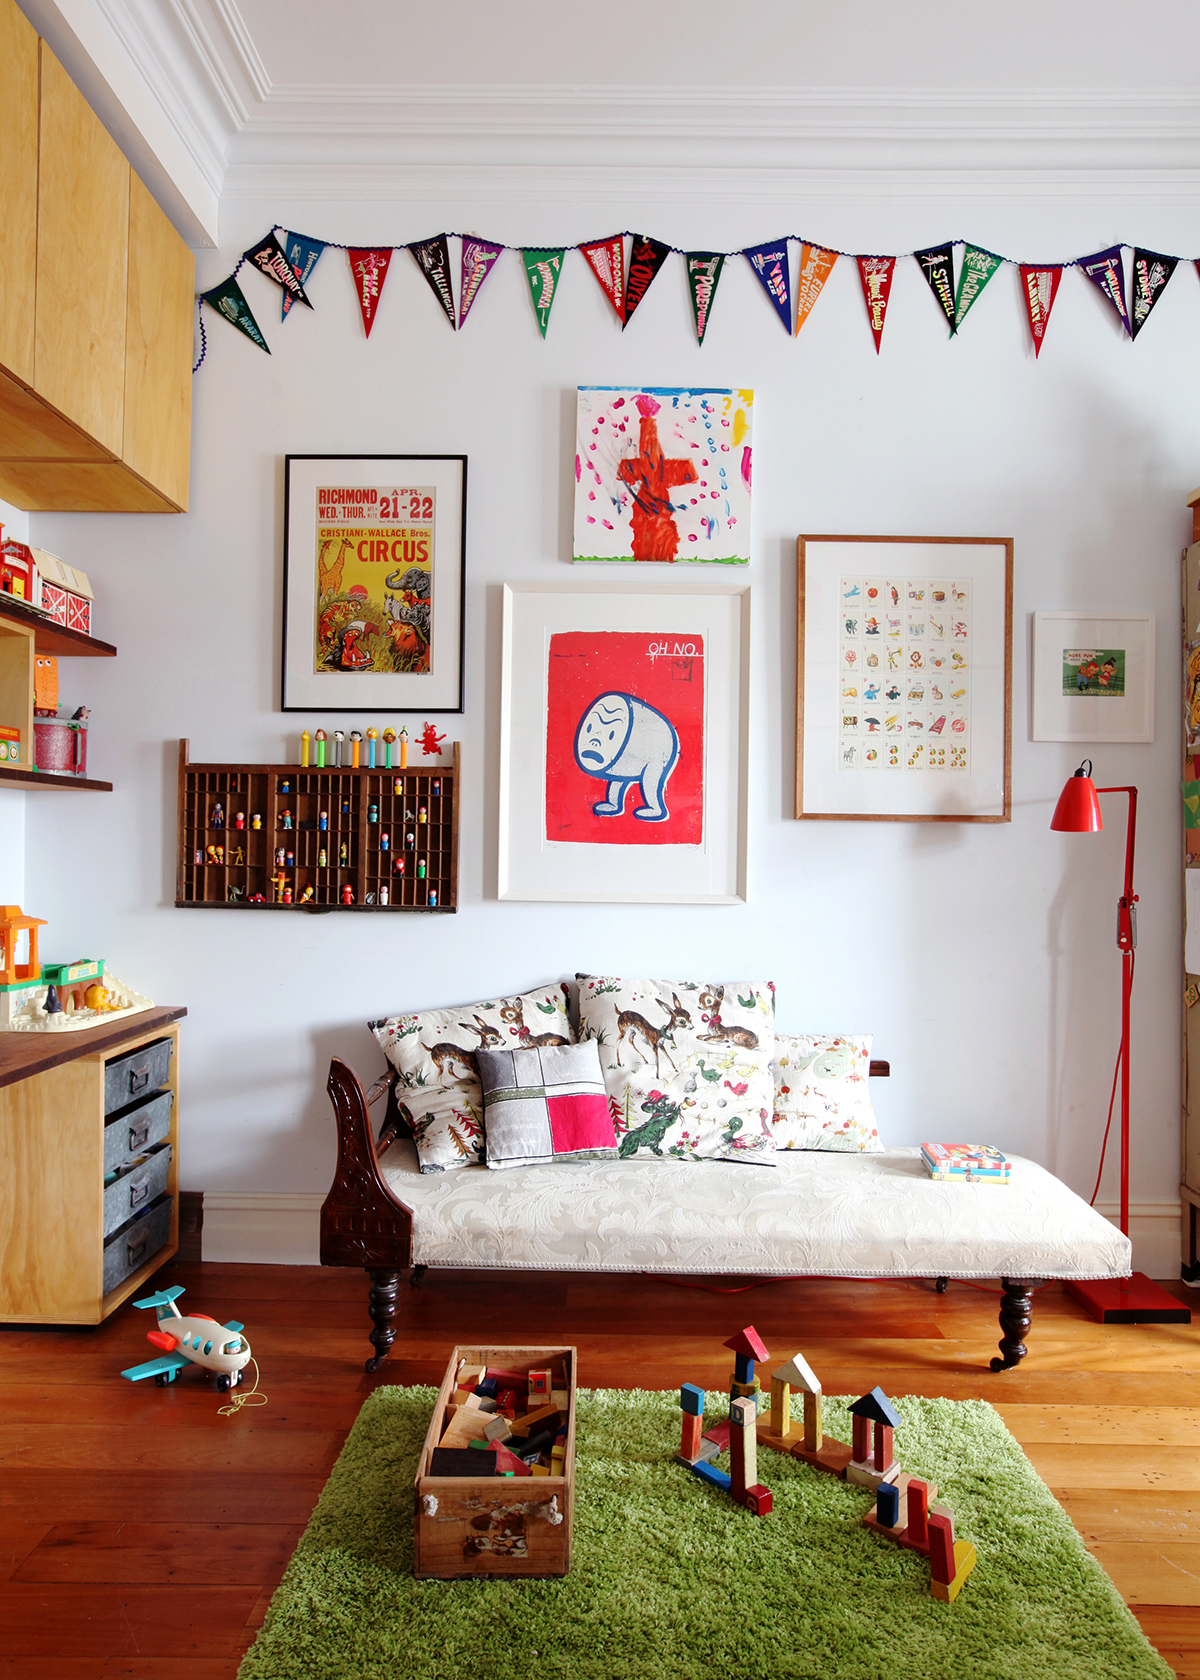 from issue 5 - styling kids rooms - Photo: Natalie Jeffcott